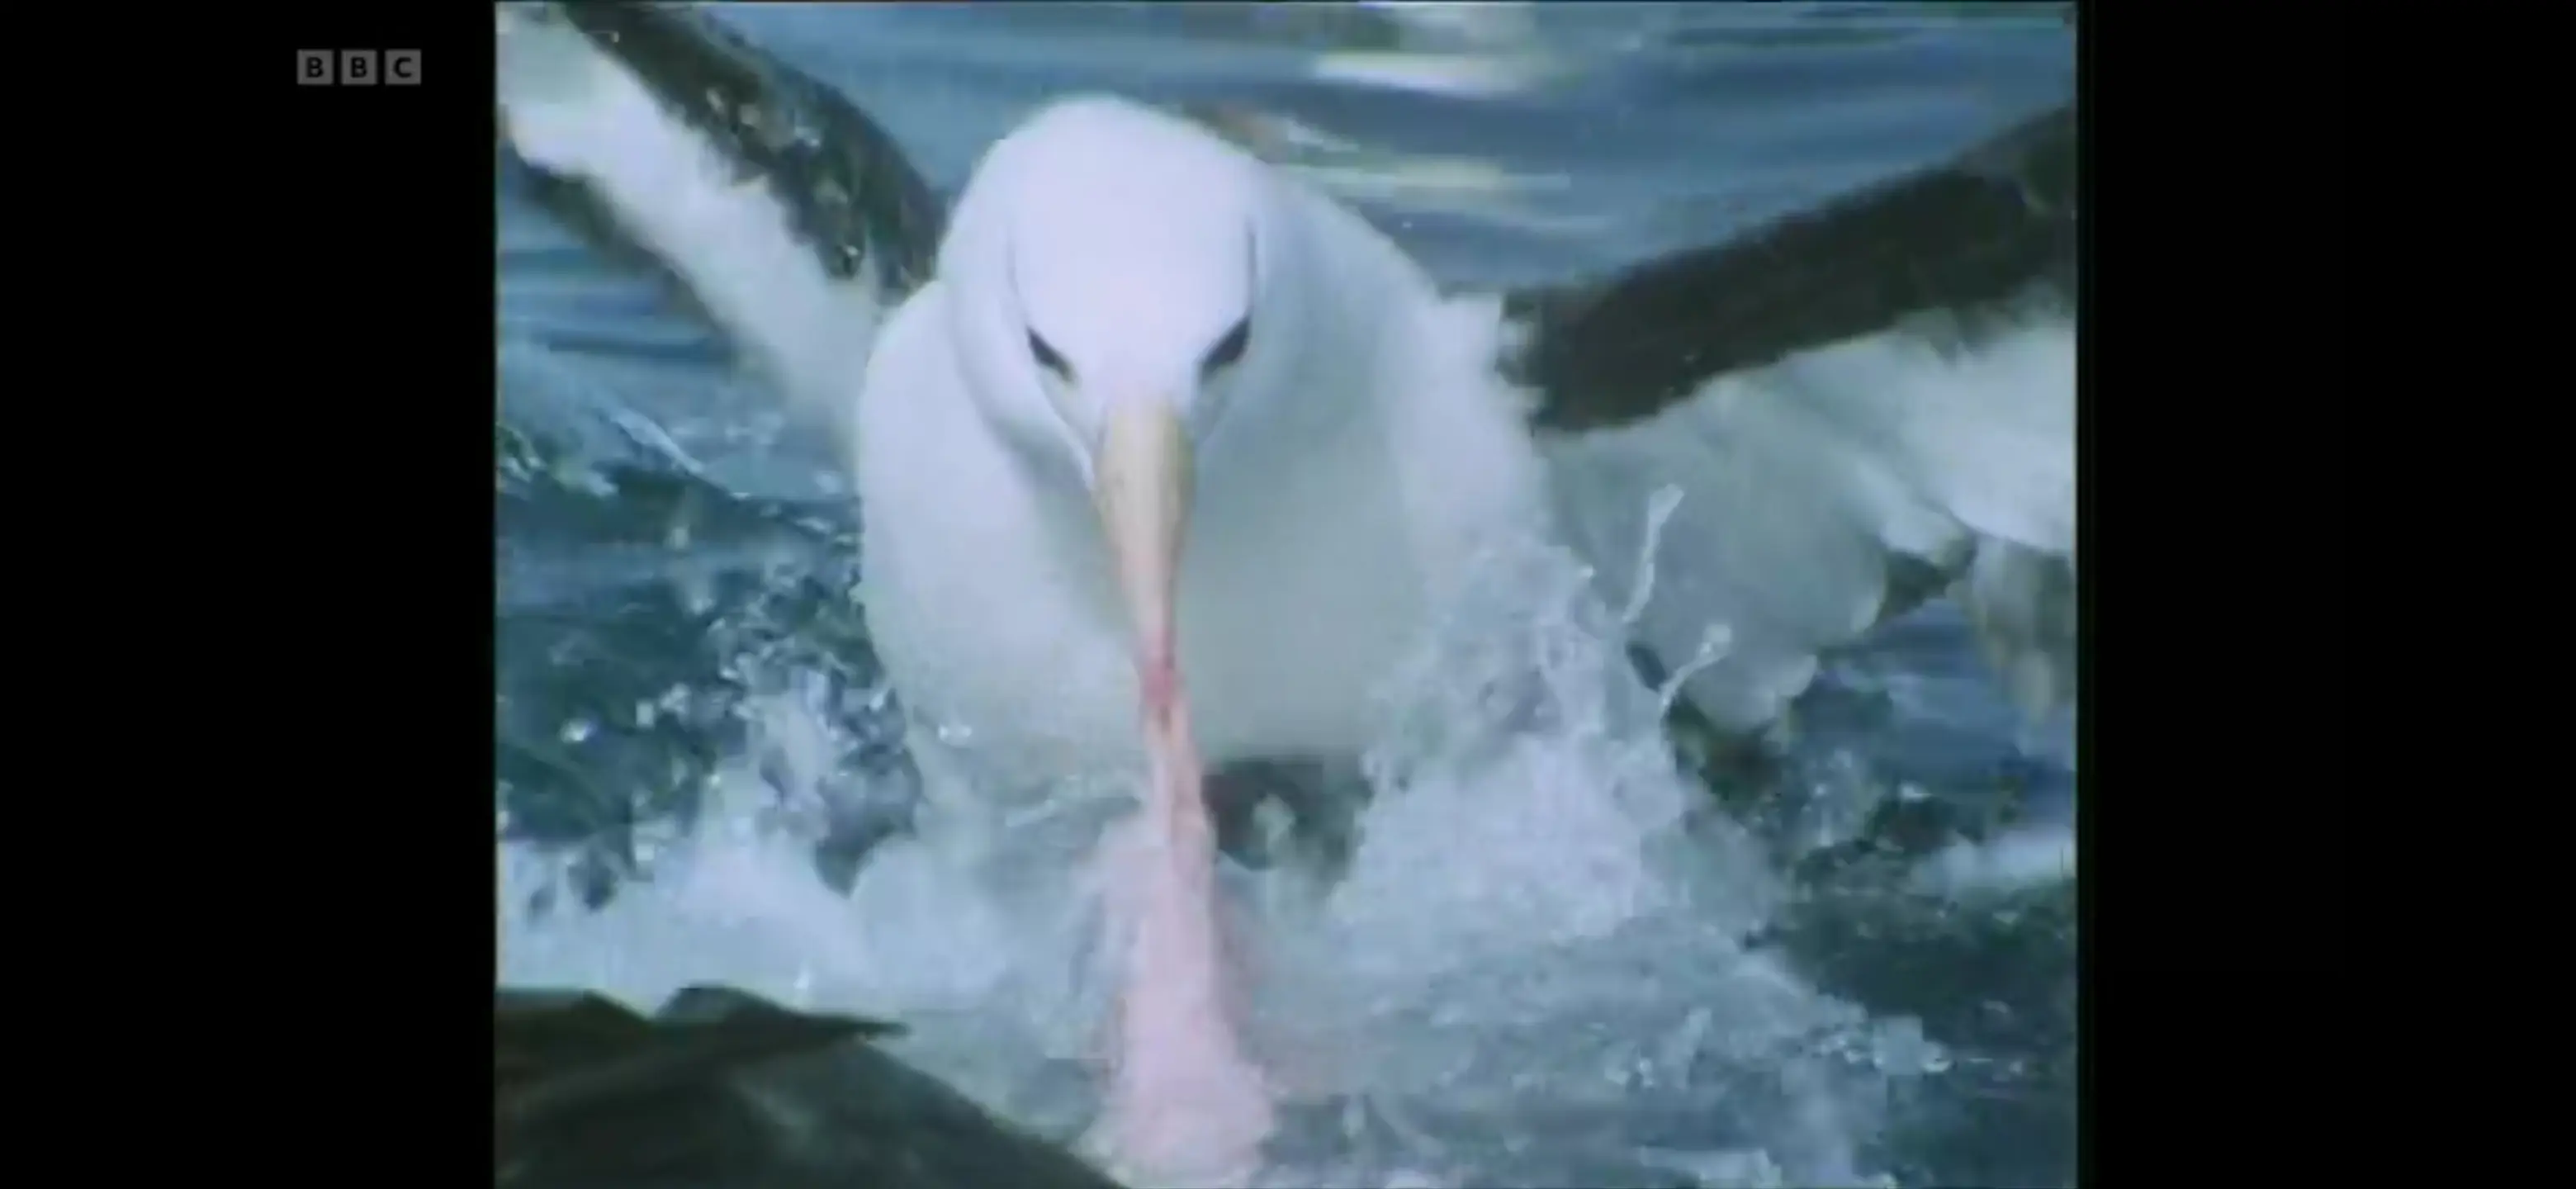 Black-browed albatross (Thalassarche melanophris) as shown in Life in the Freezer - The Bountiful Sea